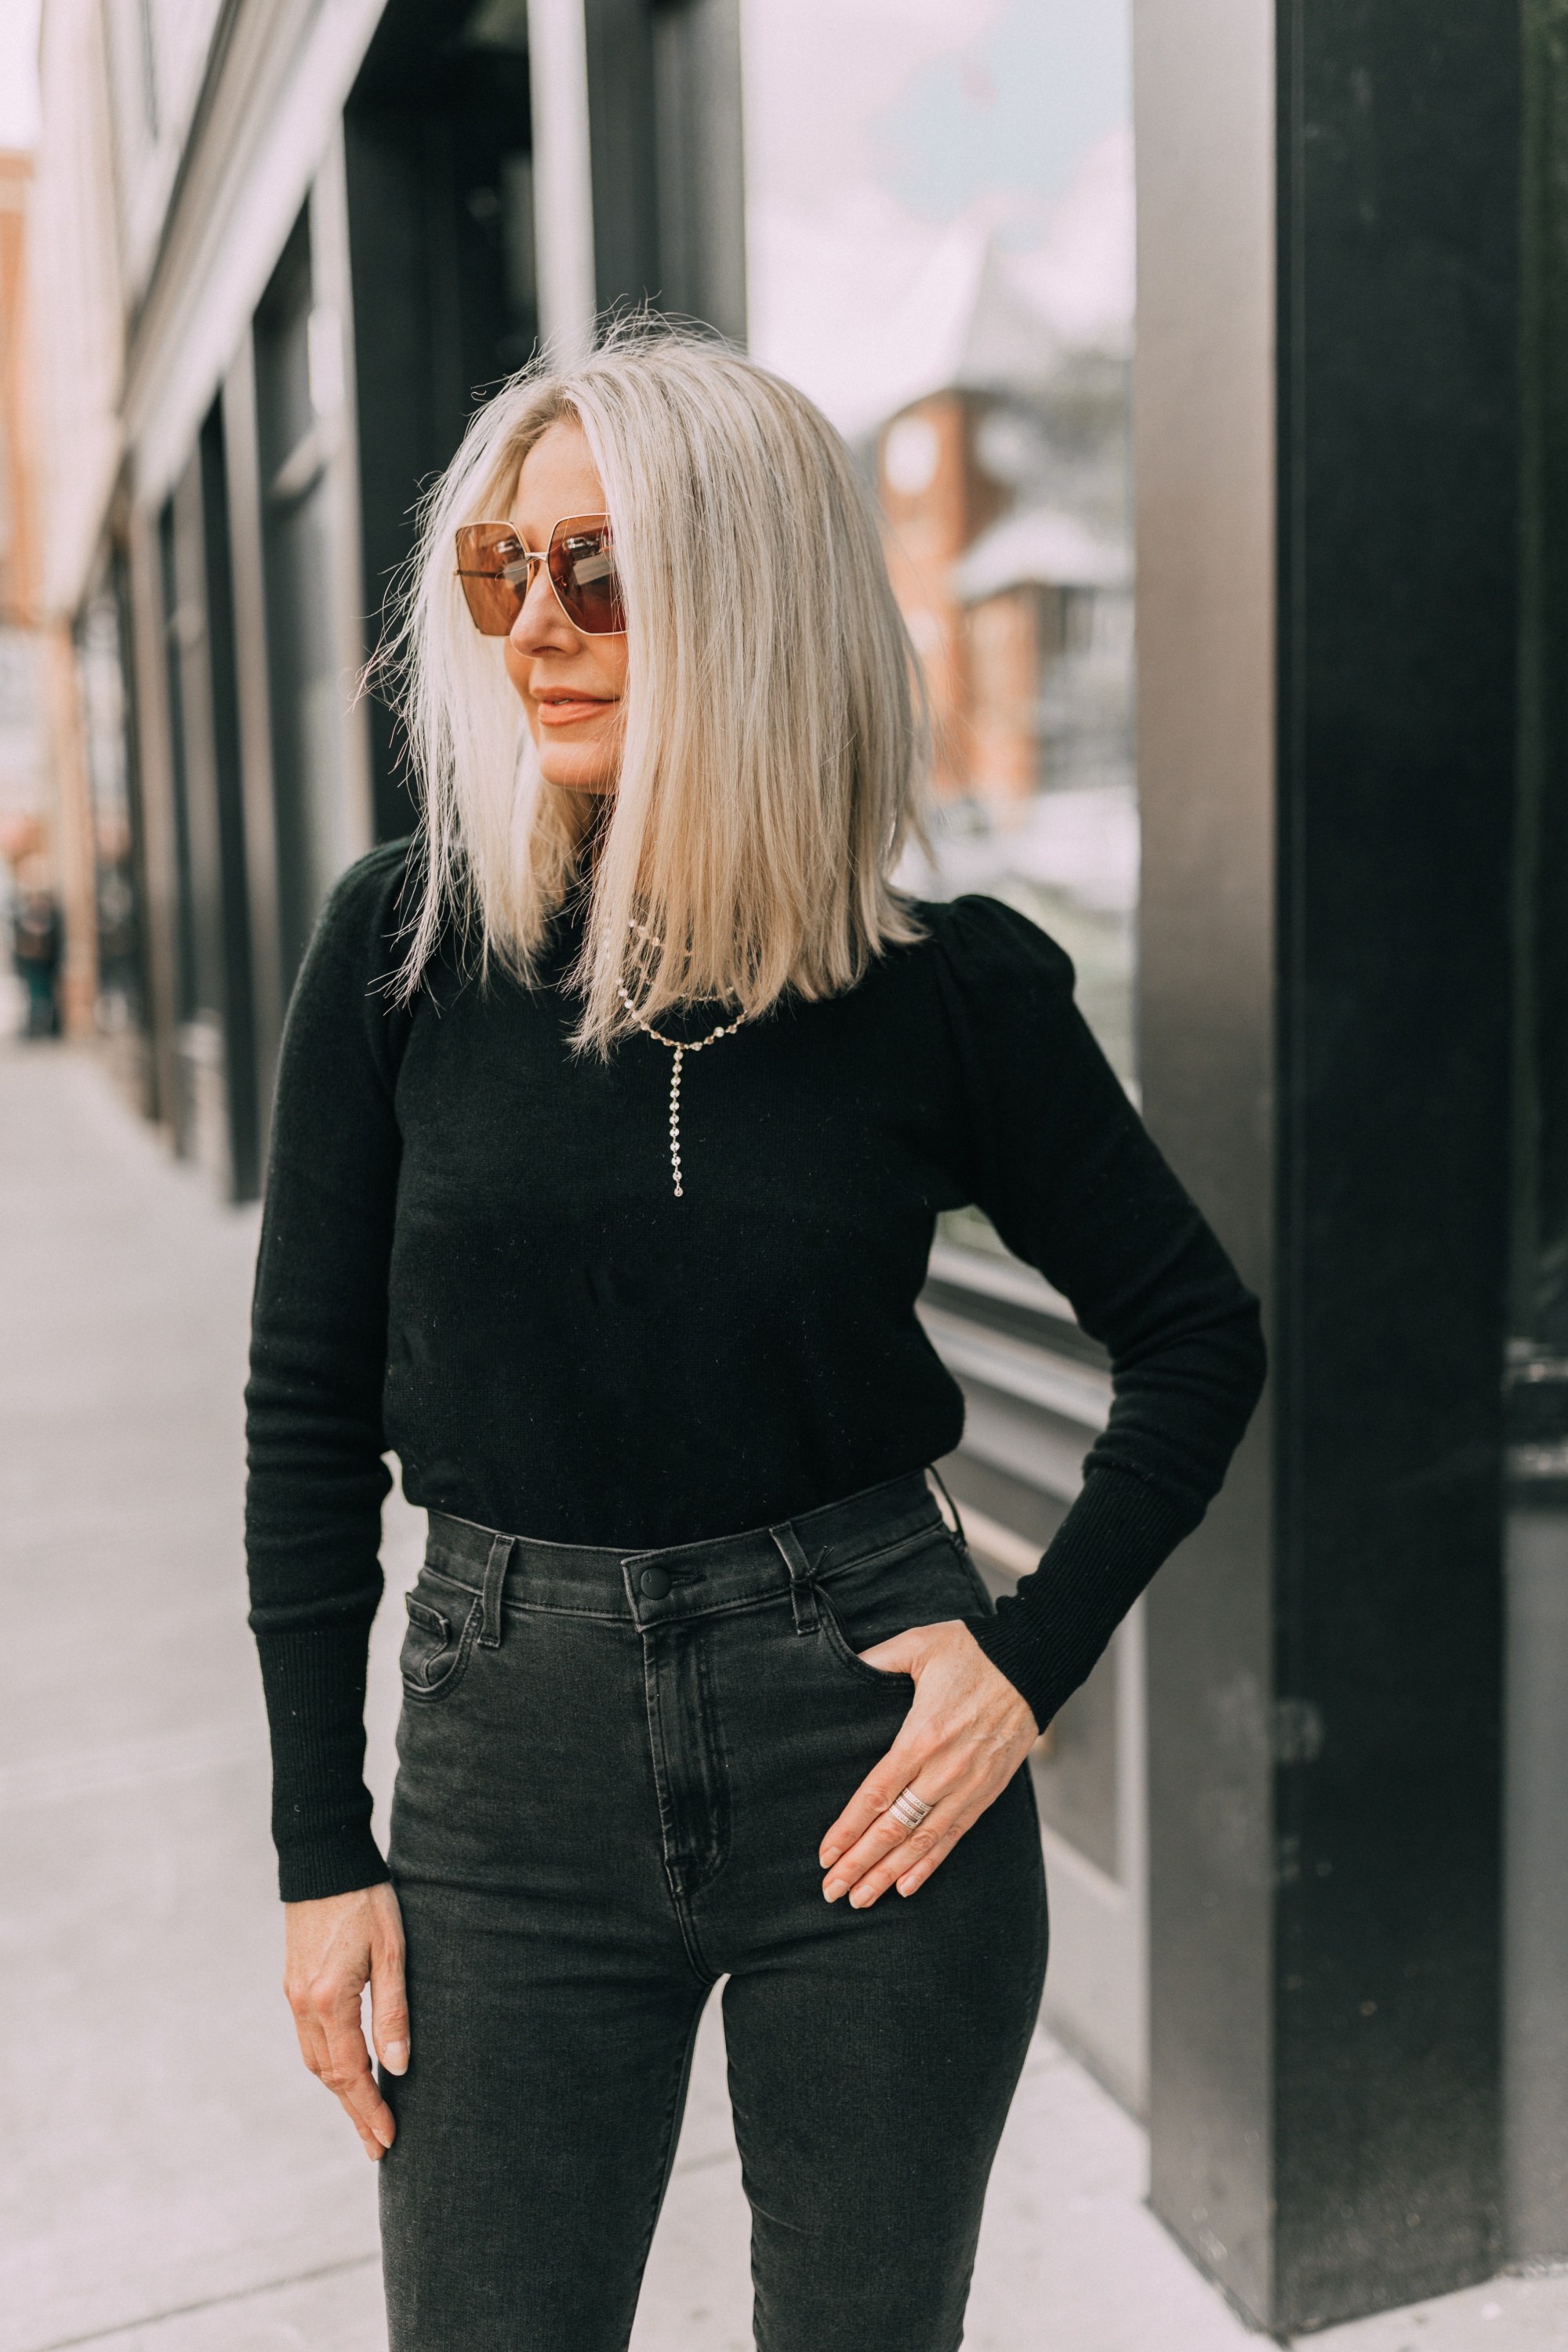 November Favorites, Fashion blogger Erin Busbee of BusbeeStyle.com wearing a black cashmere puff sleeve sweater from Bloomingdale's with black skinny jeans and a layered Baublebar necklace in Telluride, CO